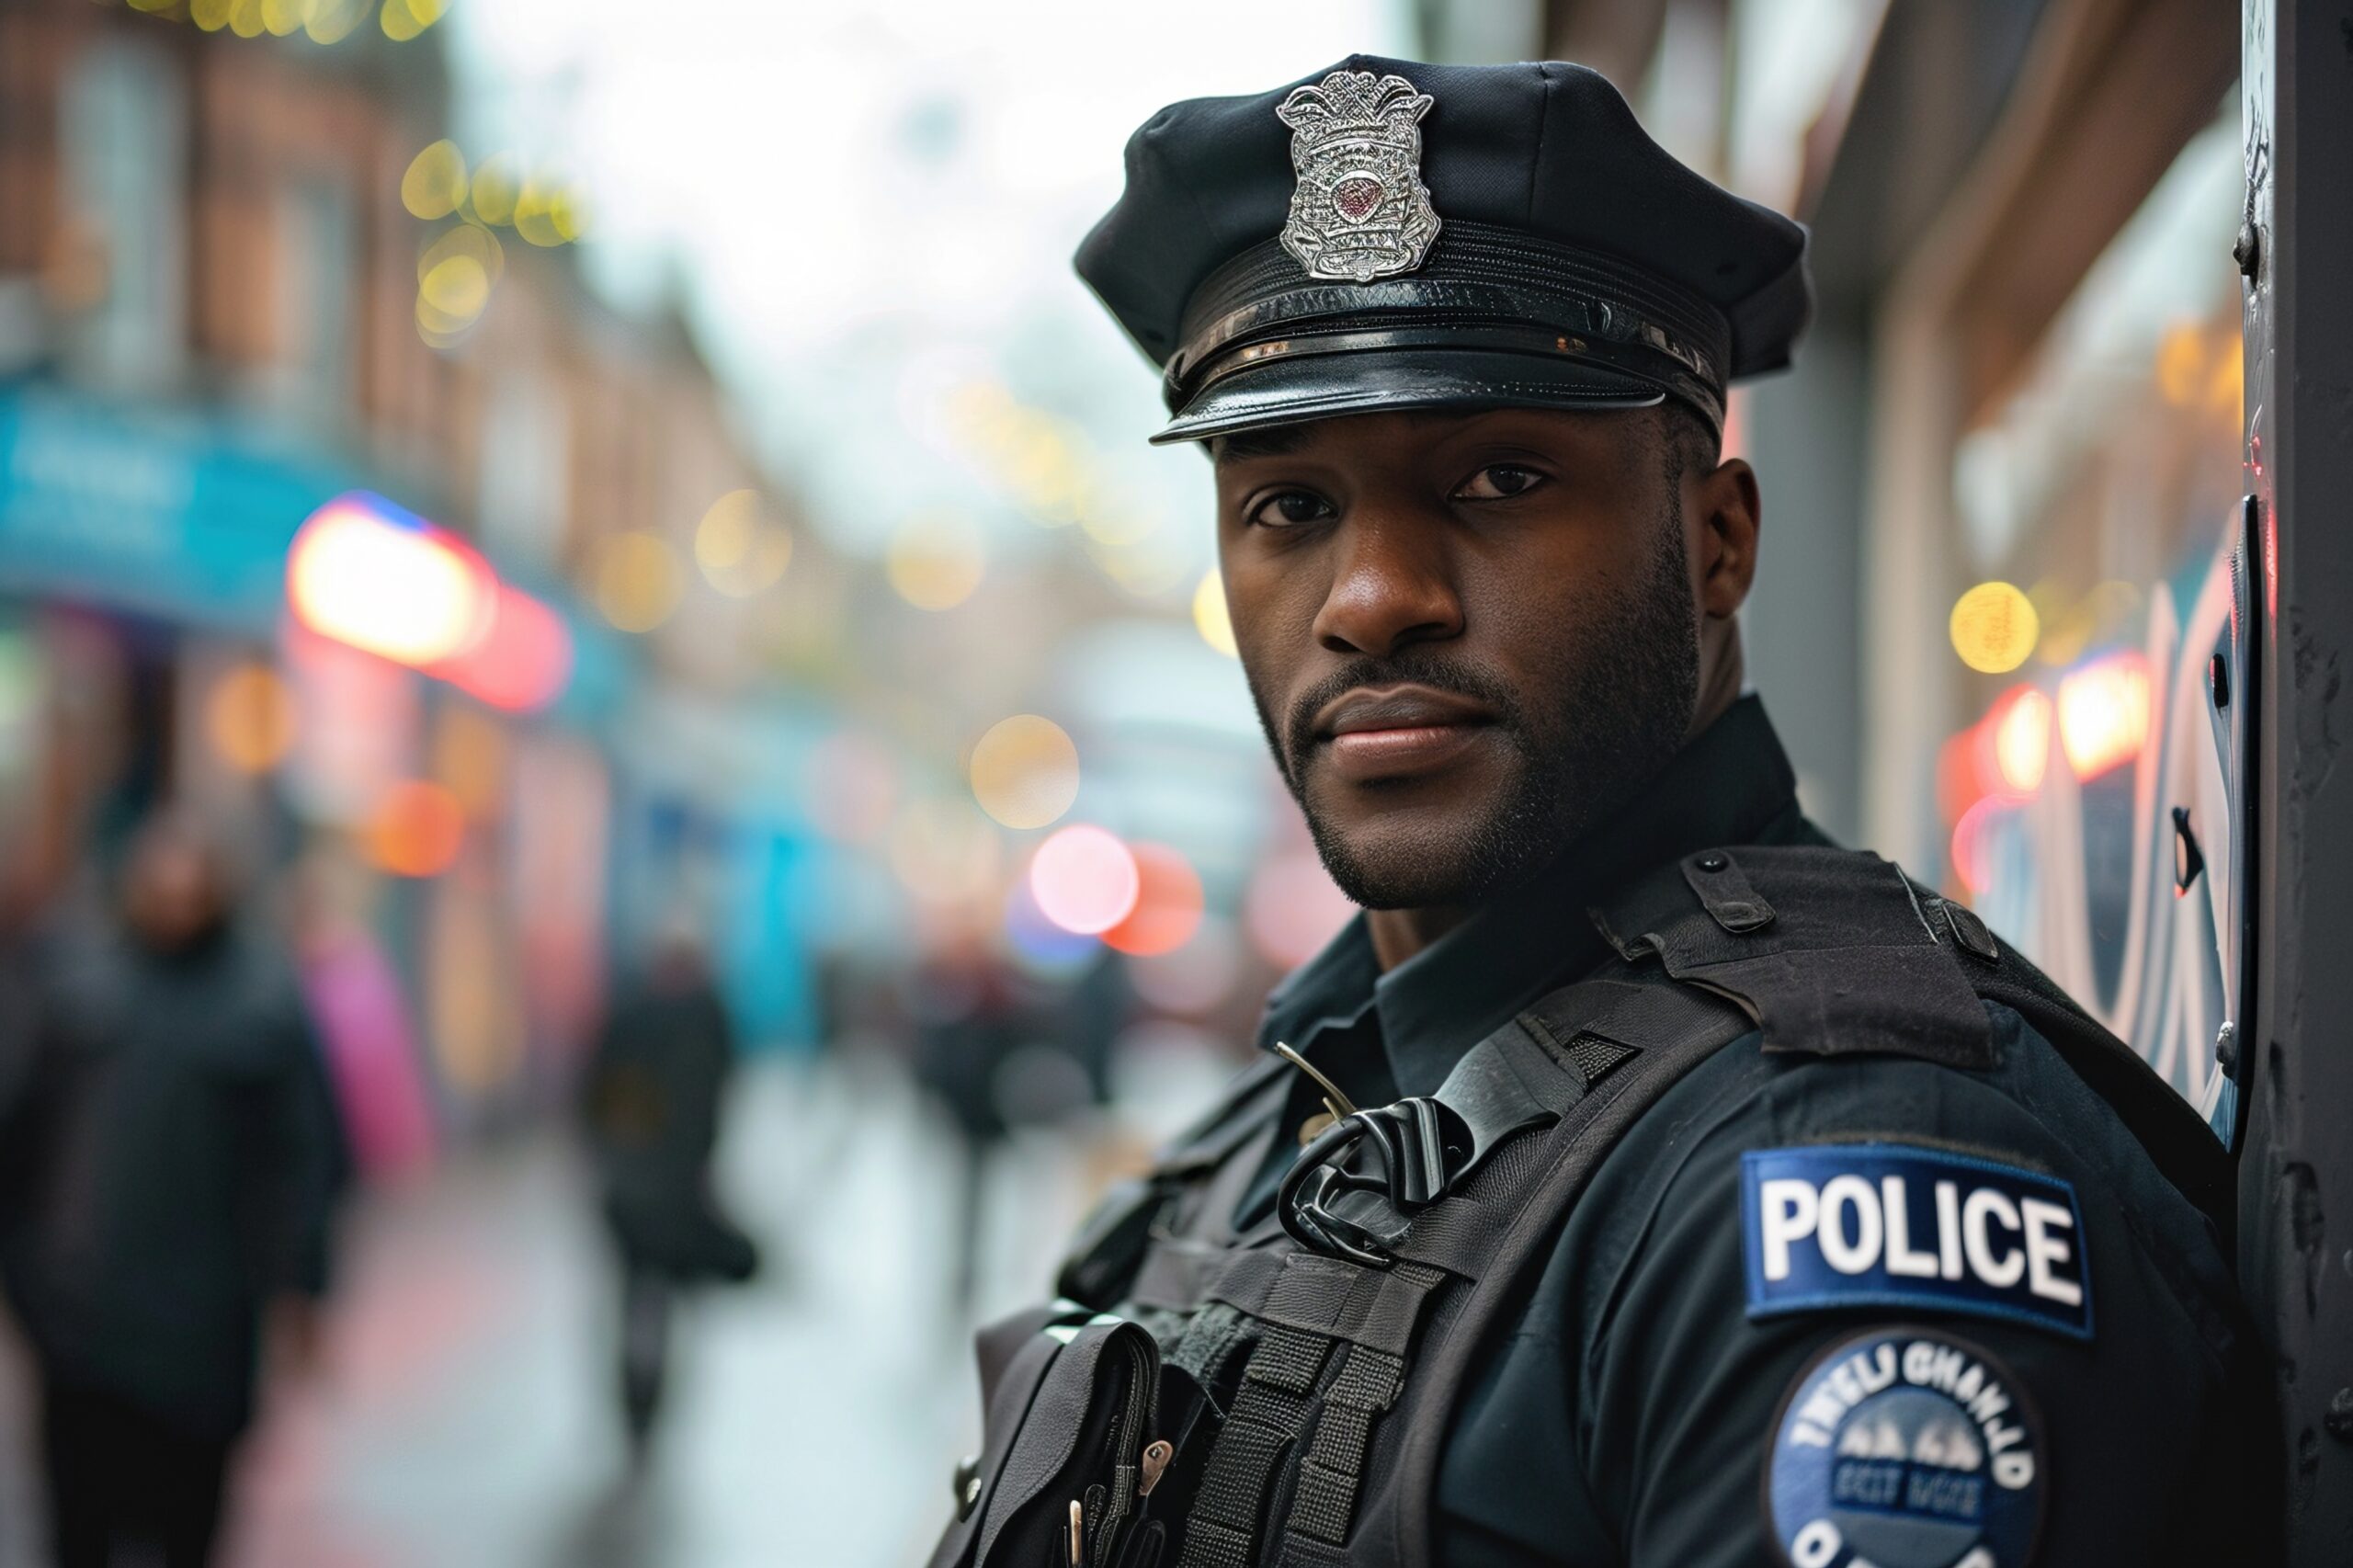 A police officer in the community.